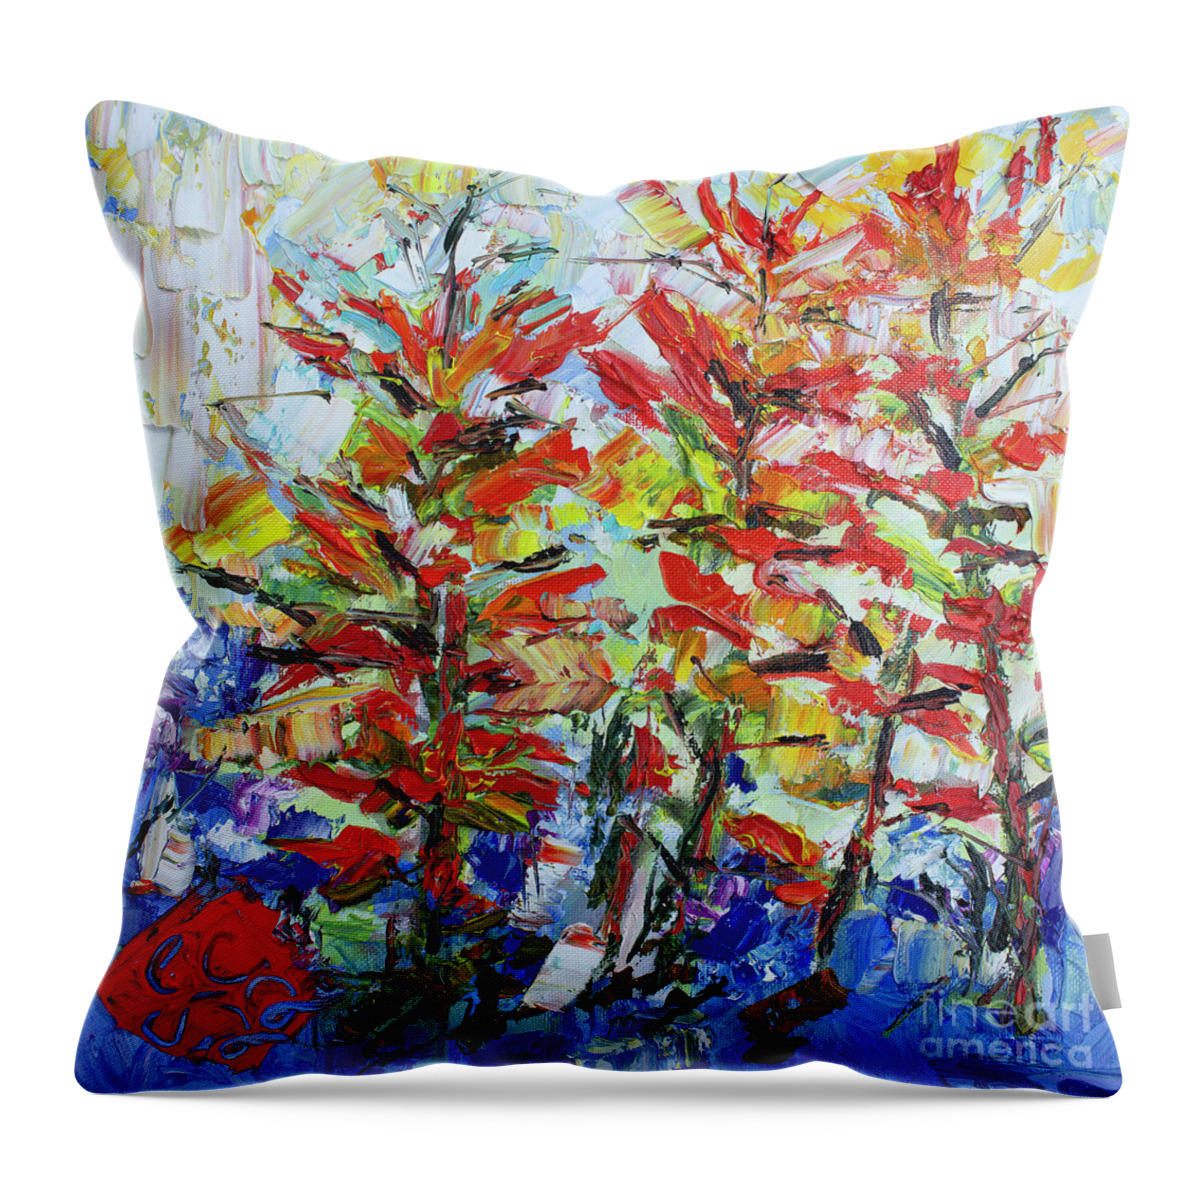 Palette Knife Oil Paintings Throw Pillow featuring the painting Texas Flowers Indian Paintbrush Palette Knife Oil On Canvas by Ginette Callaway